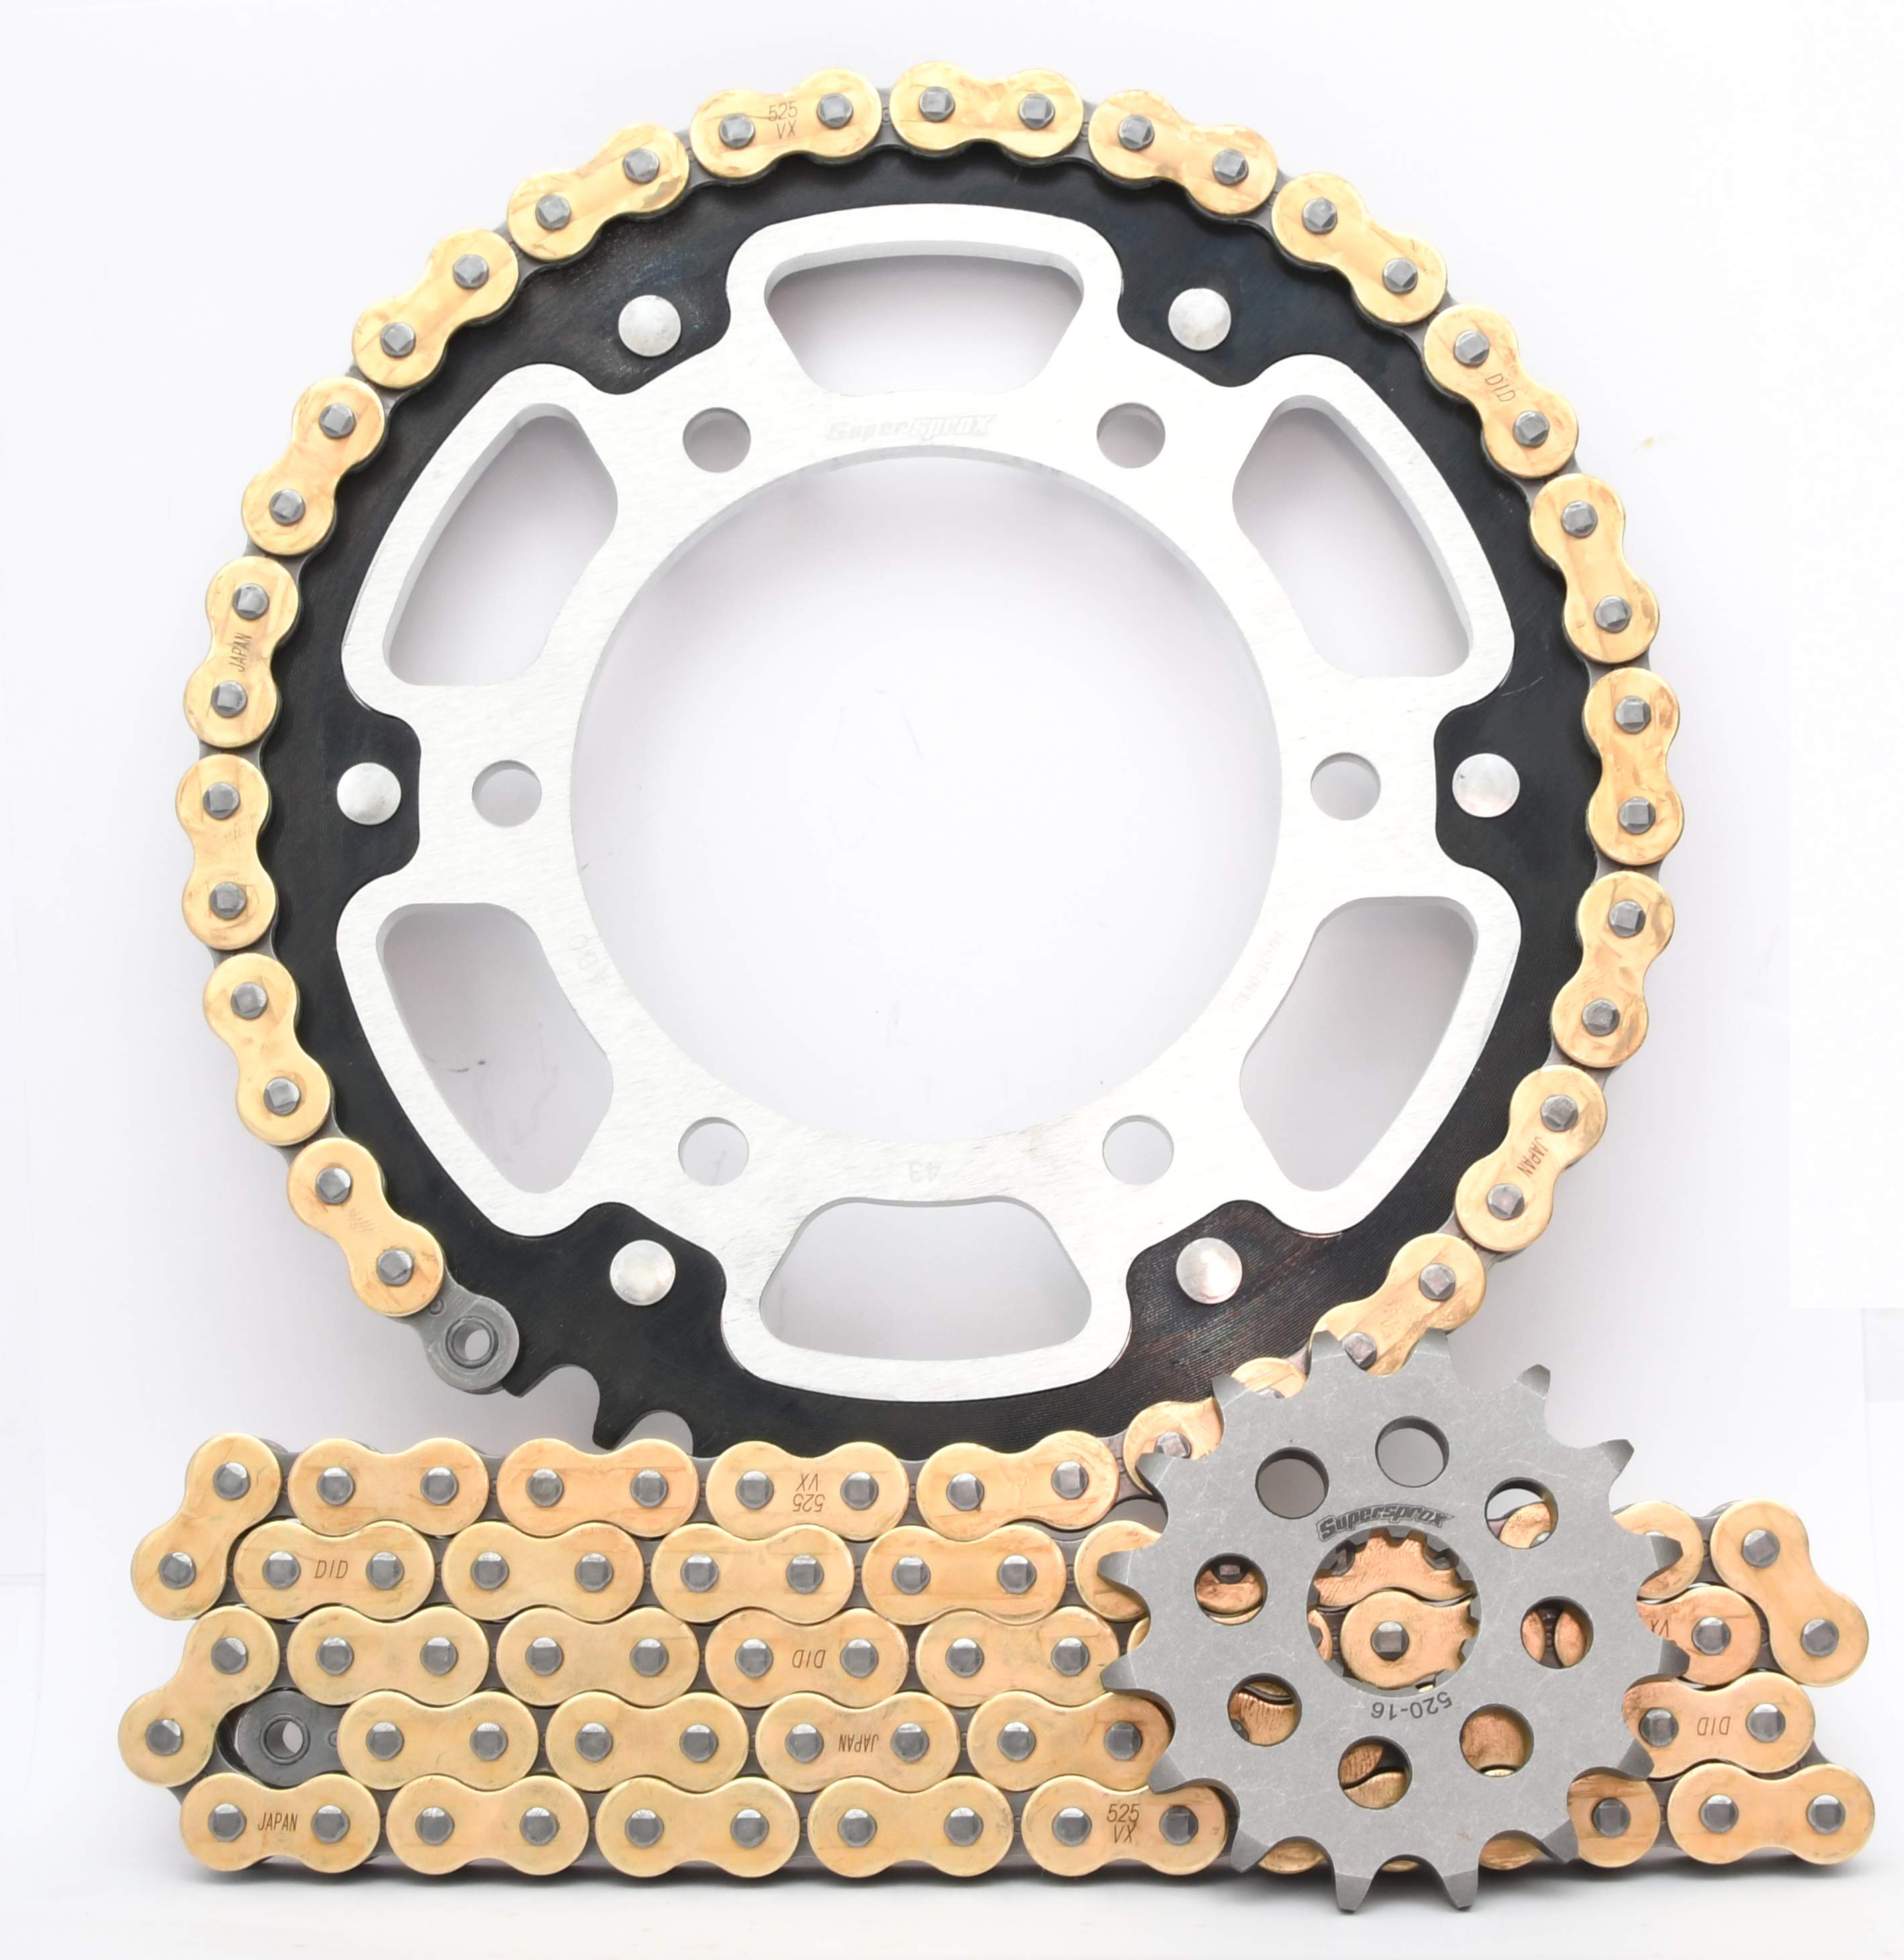 Supersprox Chain & Sprocket Kit for Yamaha MT-10 - Choose Your Gearing